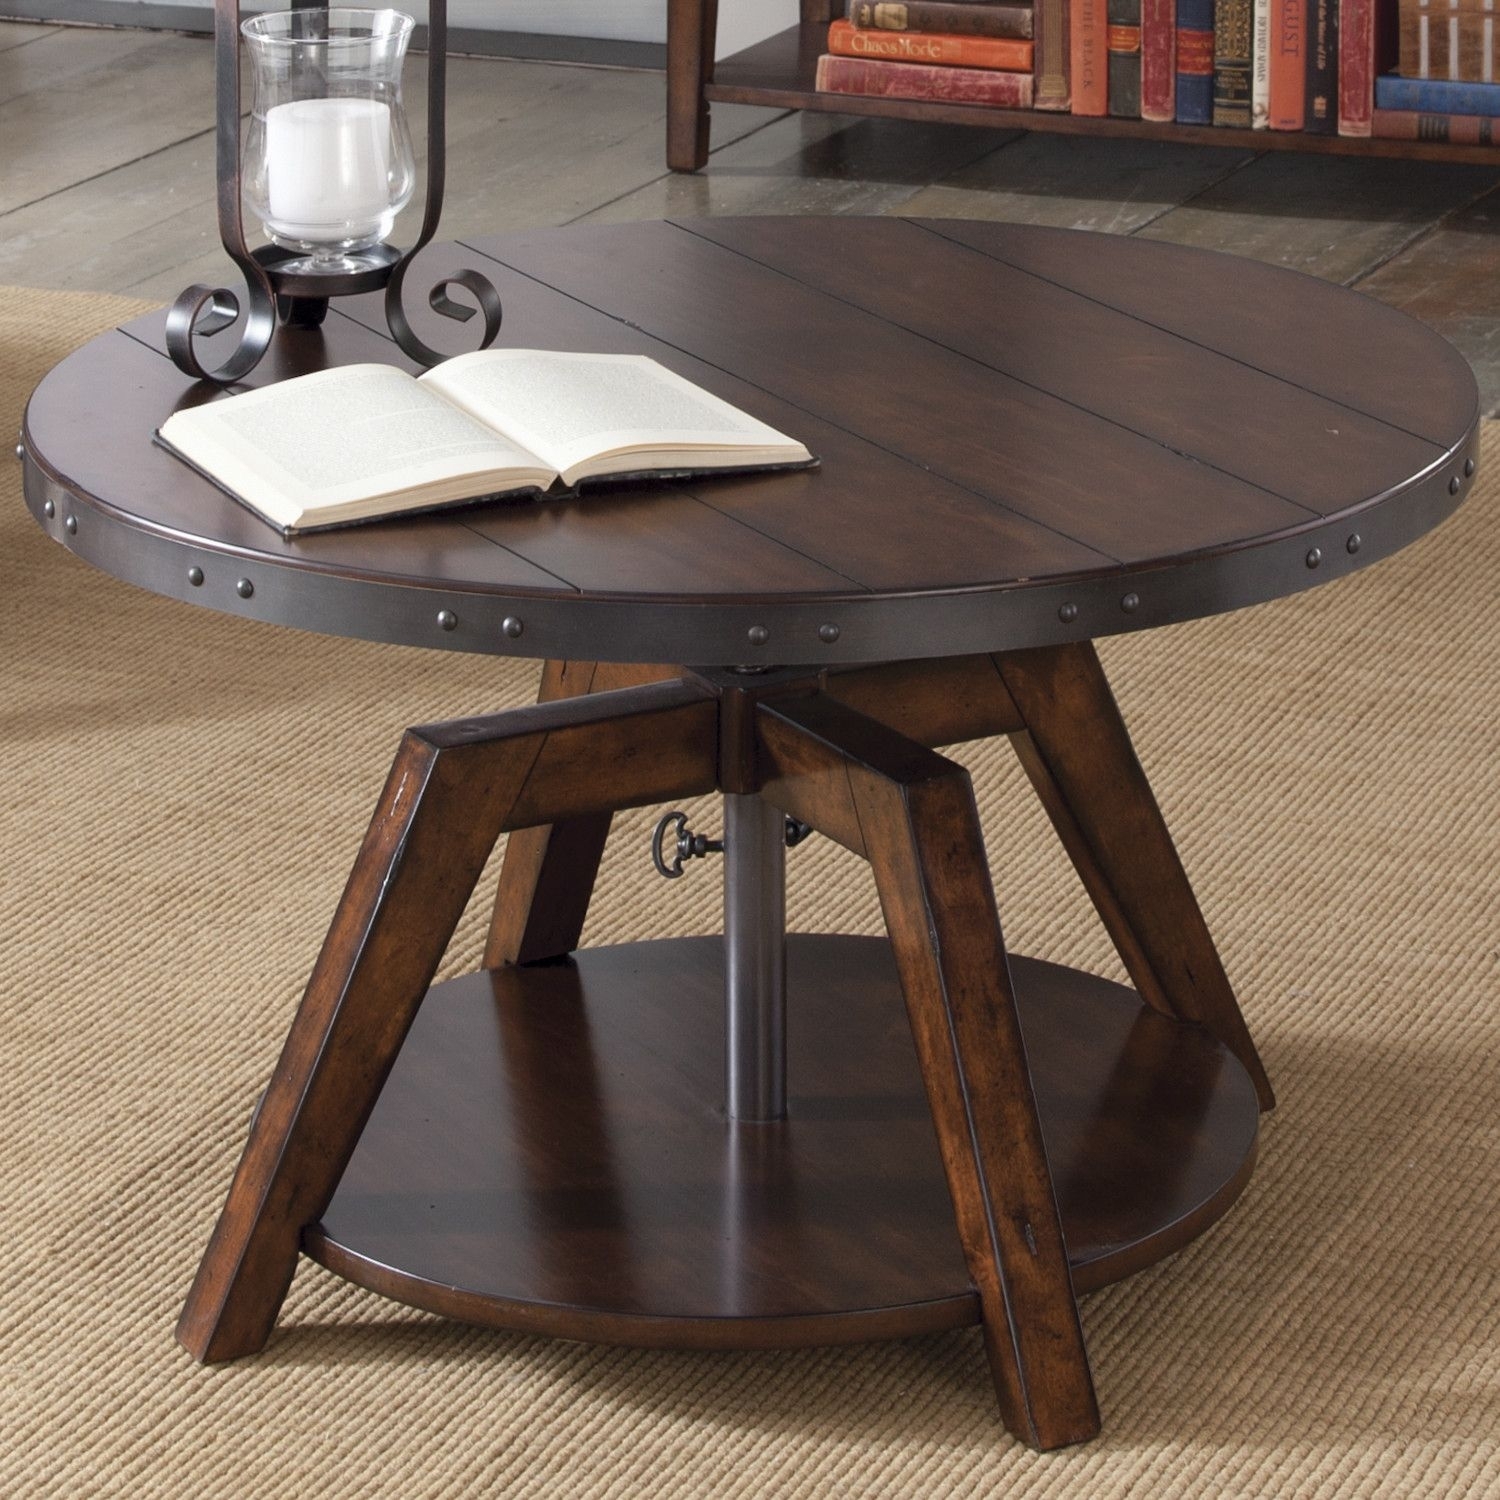 Newood Box Transformable Coffee to Dining Table